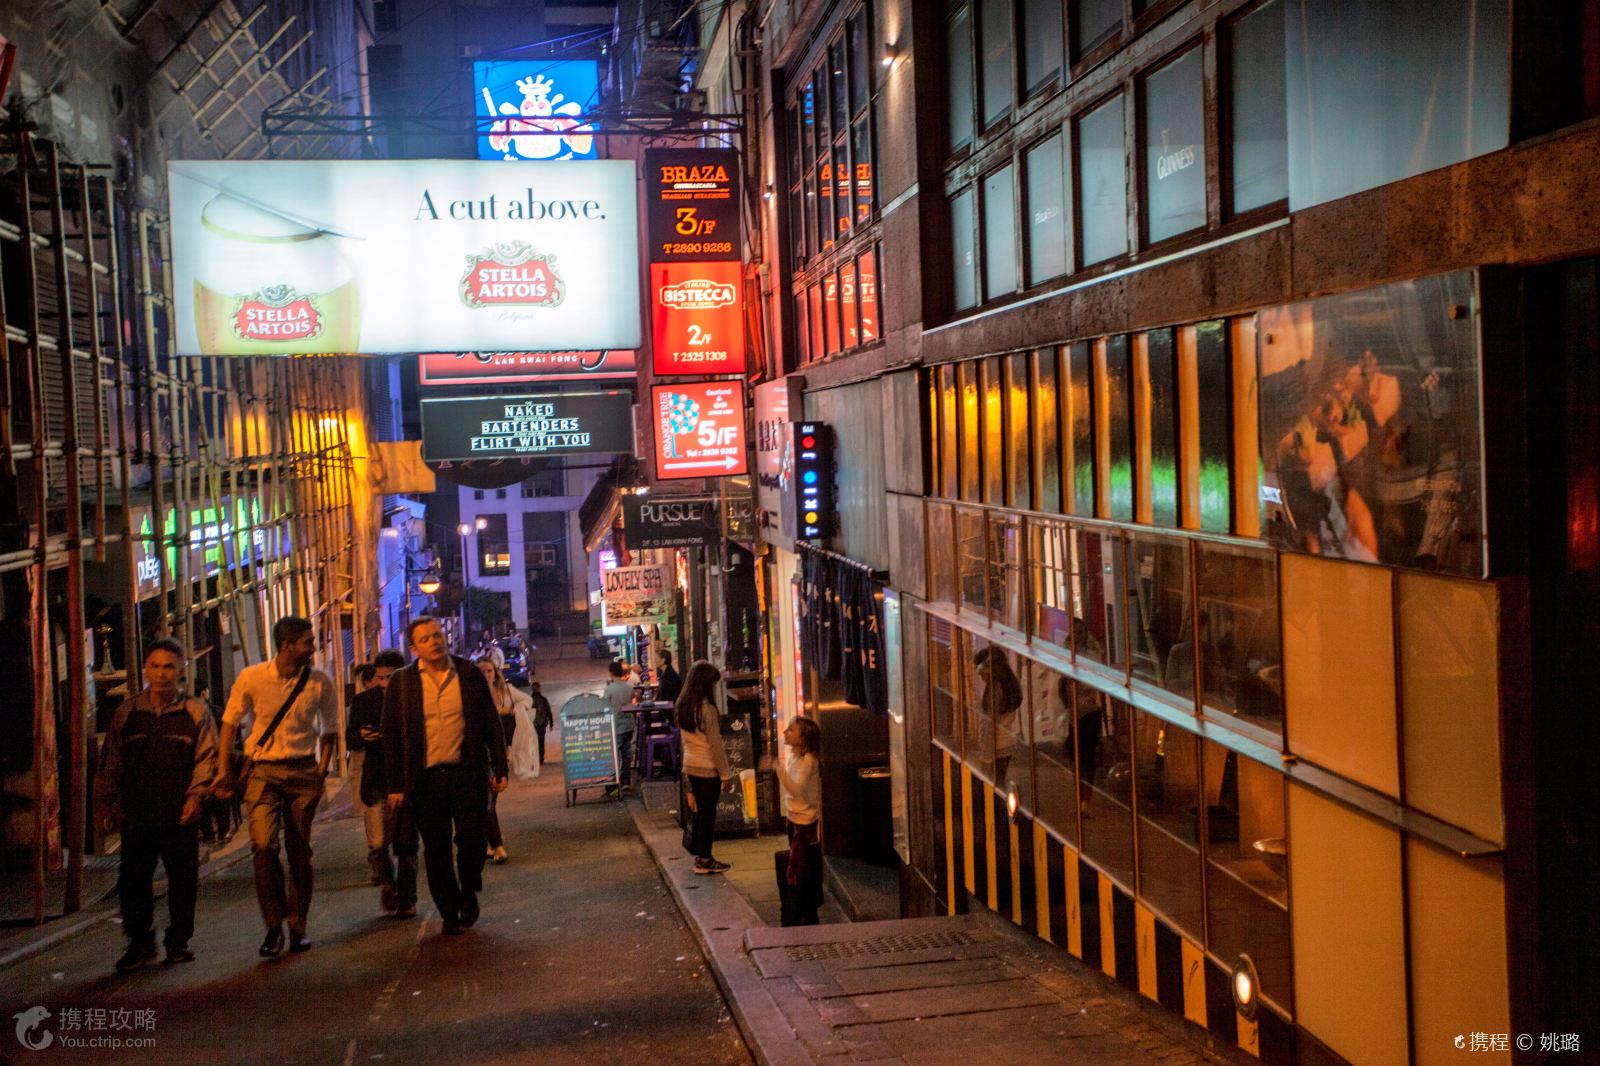 30 pc business rise expected for Lan Kwai Fong restaurants after Halloween